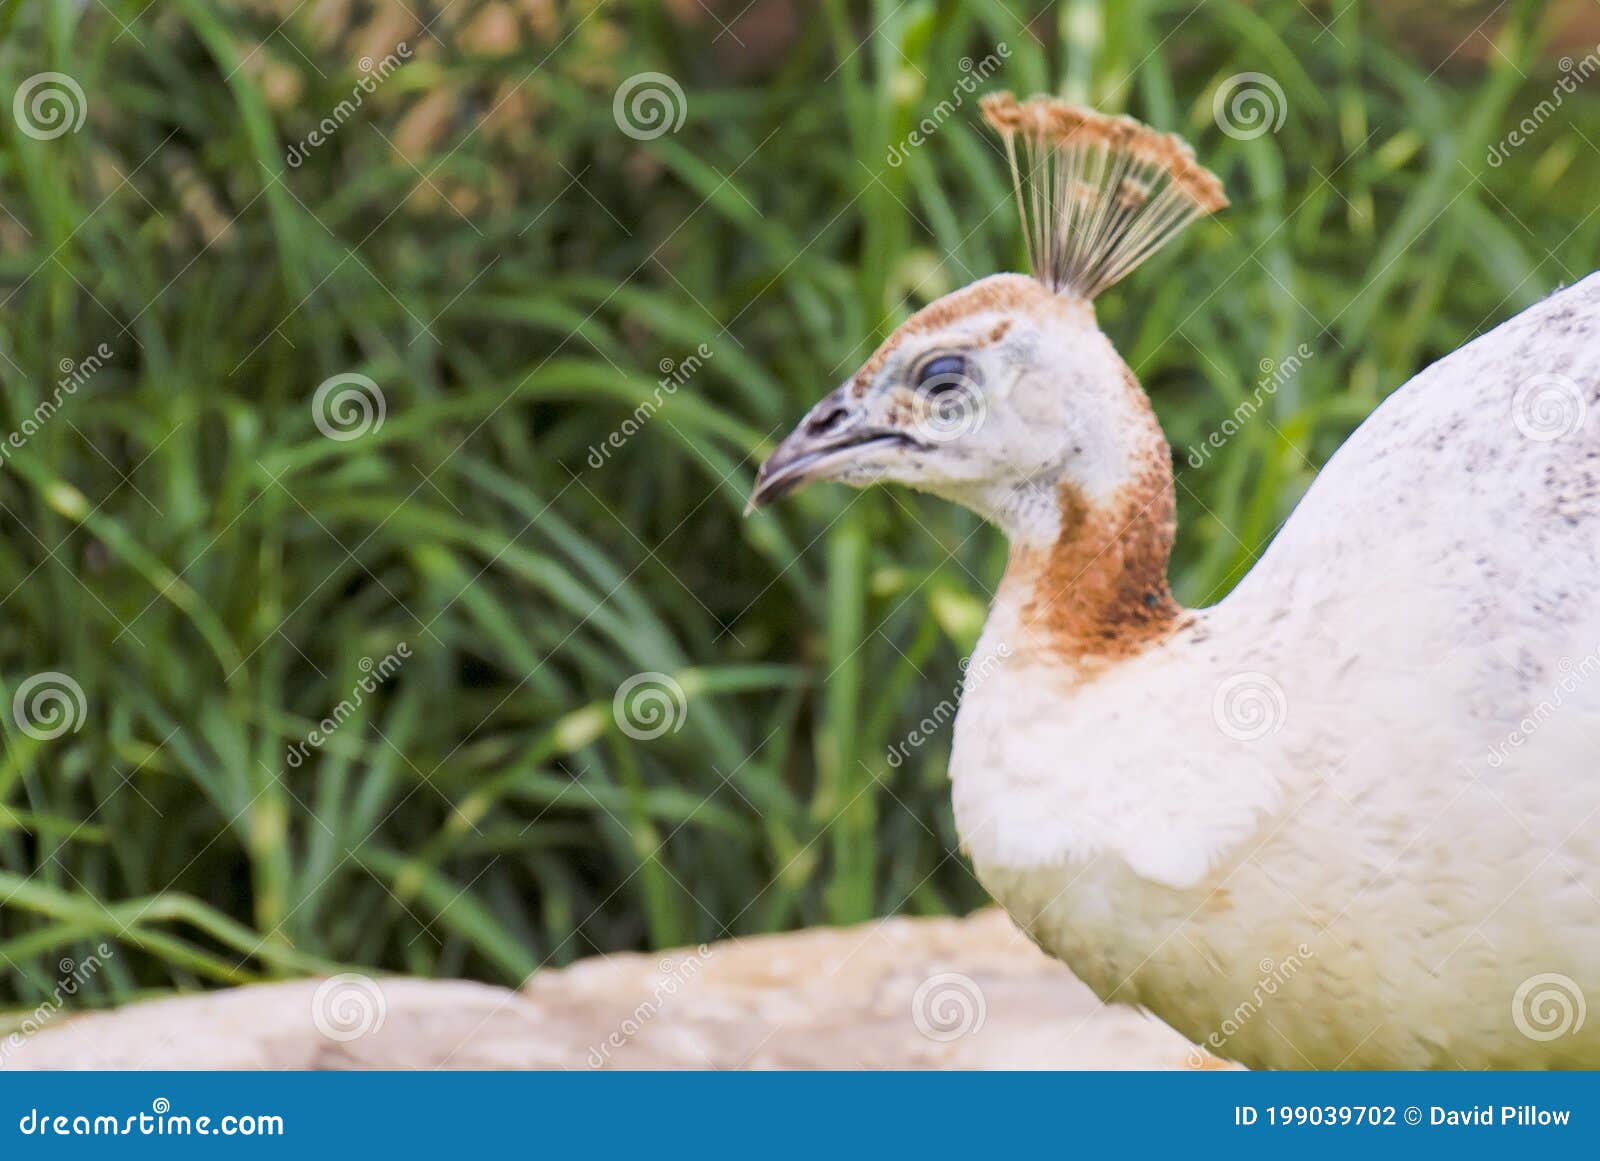 1 736 White Female Peacock Photos Free Royalty Free Stock Photos From Dreamstime